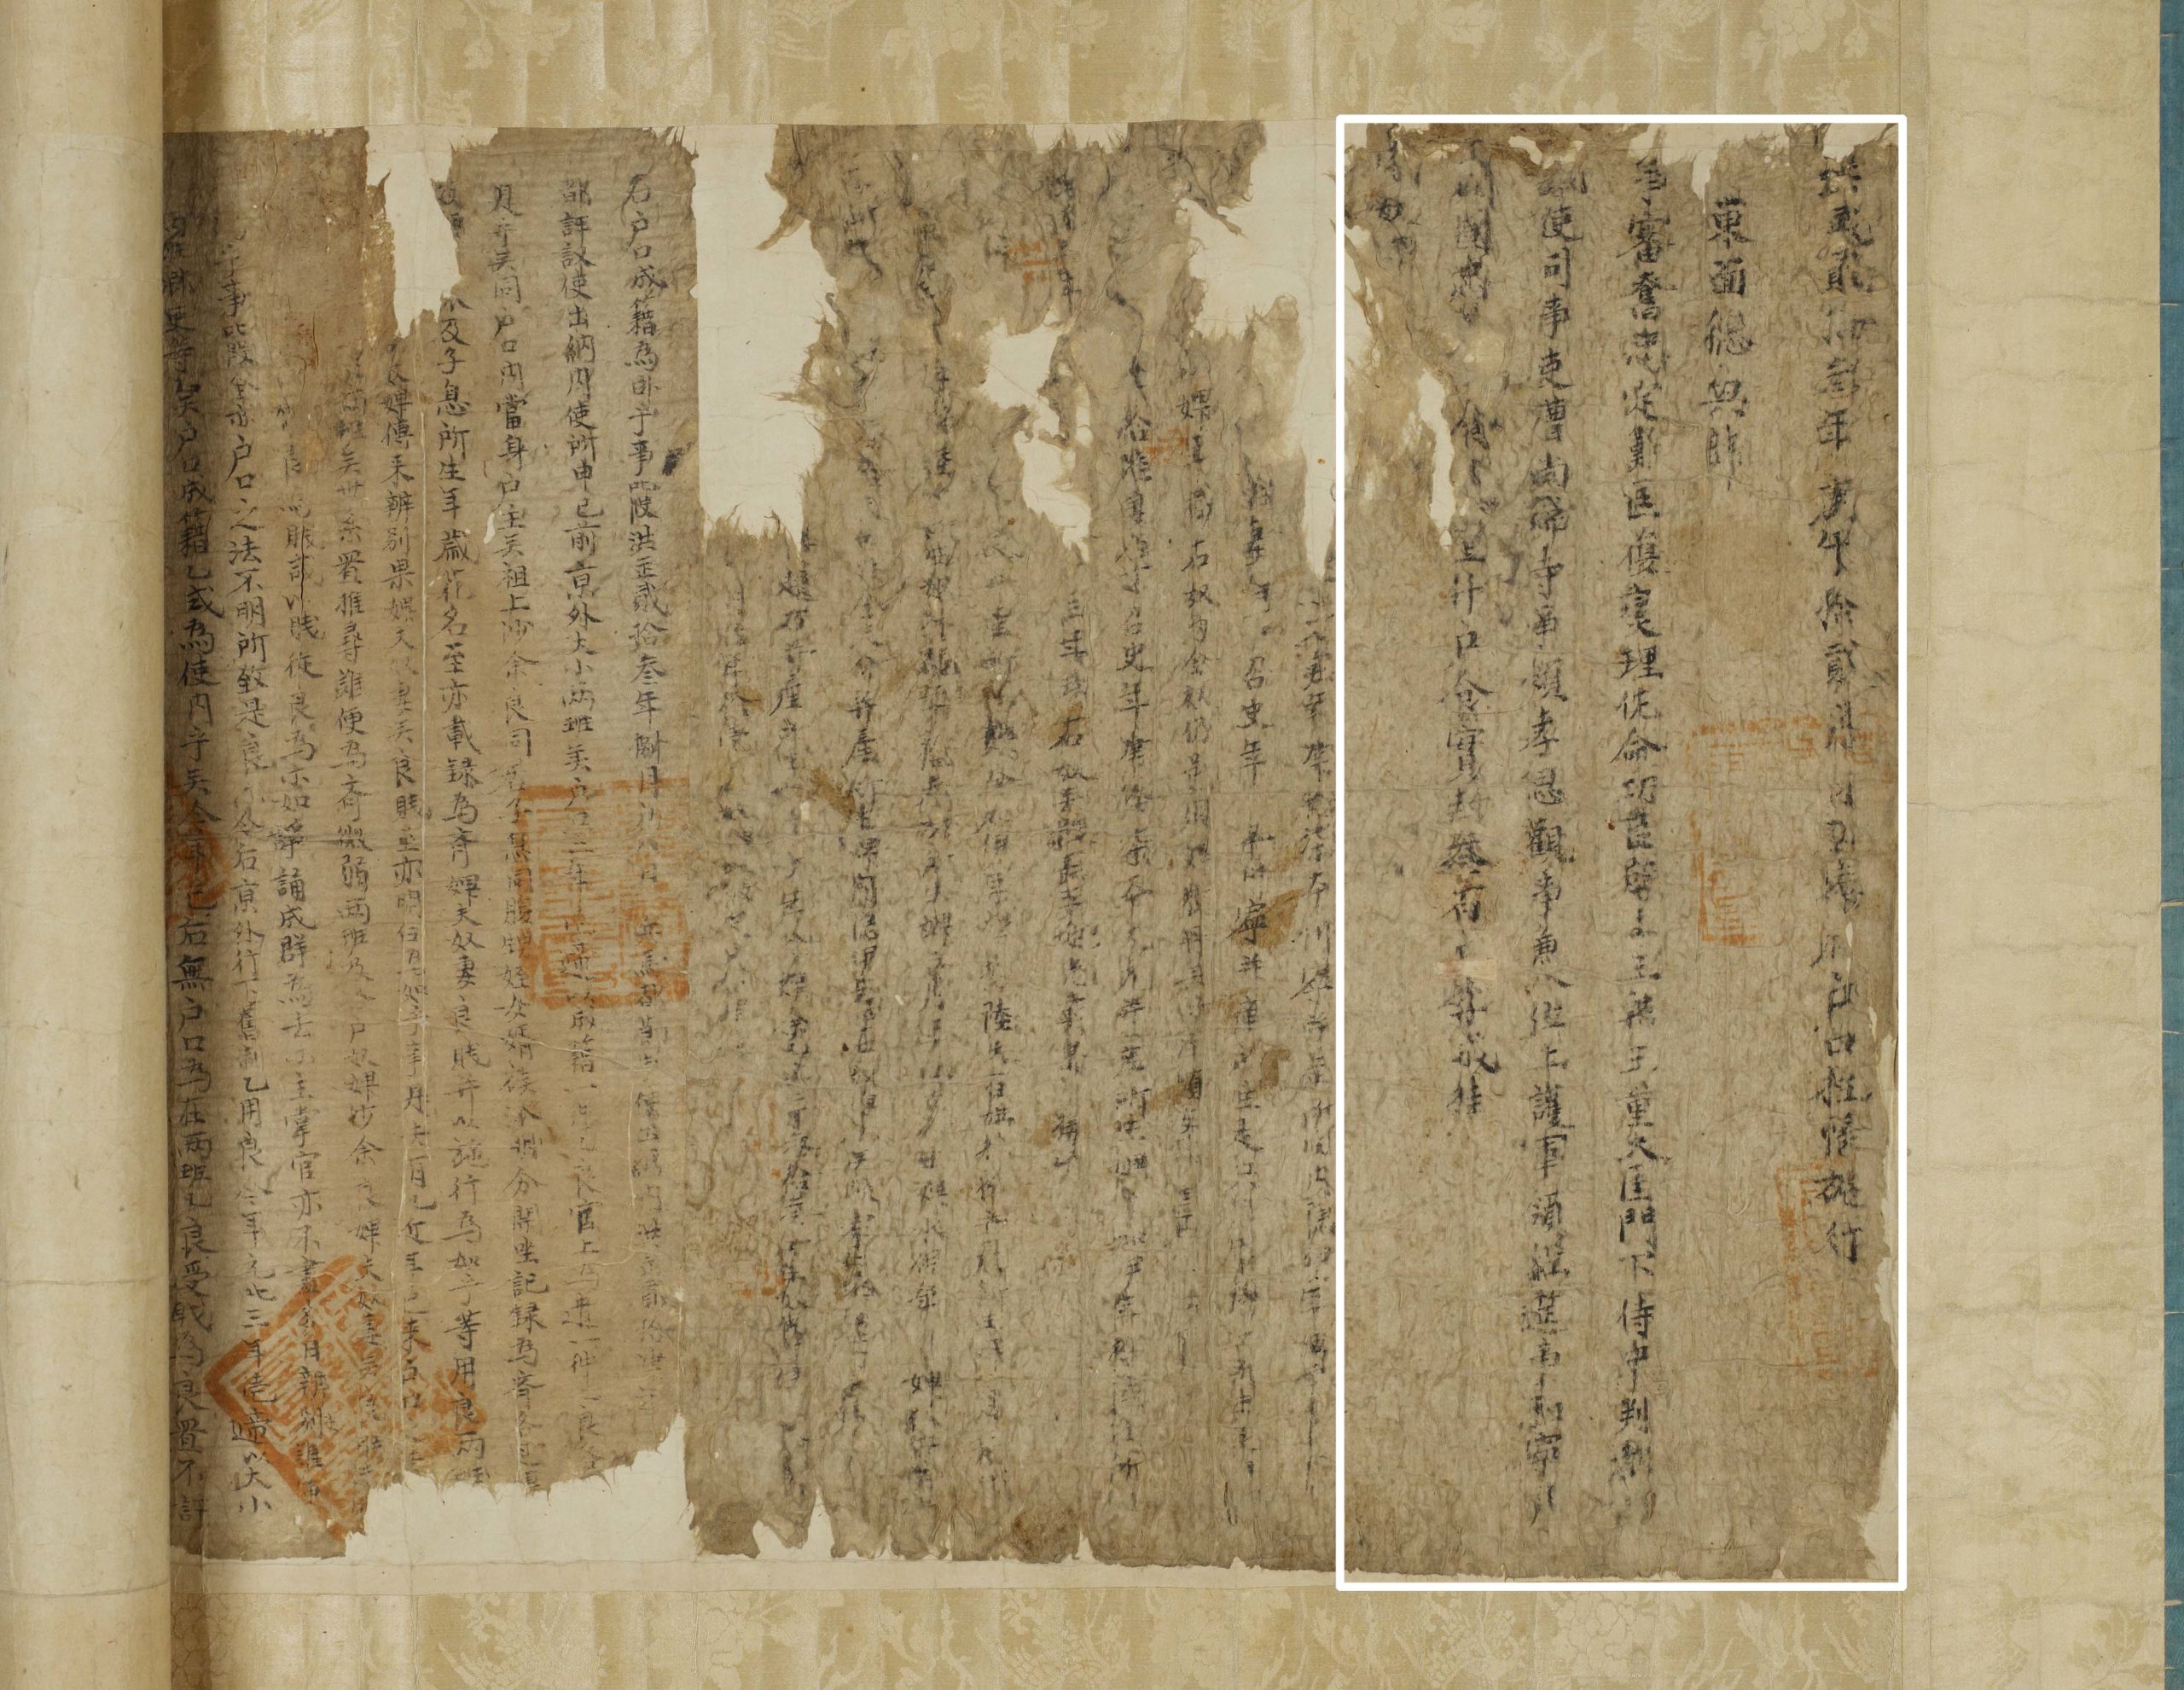 First page, which documents the slaves of Yi Seonggye. Official Register (detail), 1390, Goryeo Dynasty, mulberry paper, 55.7 x 386 cm (The National Museum of Korea, National Treasure 131)